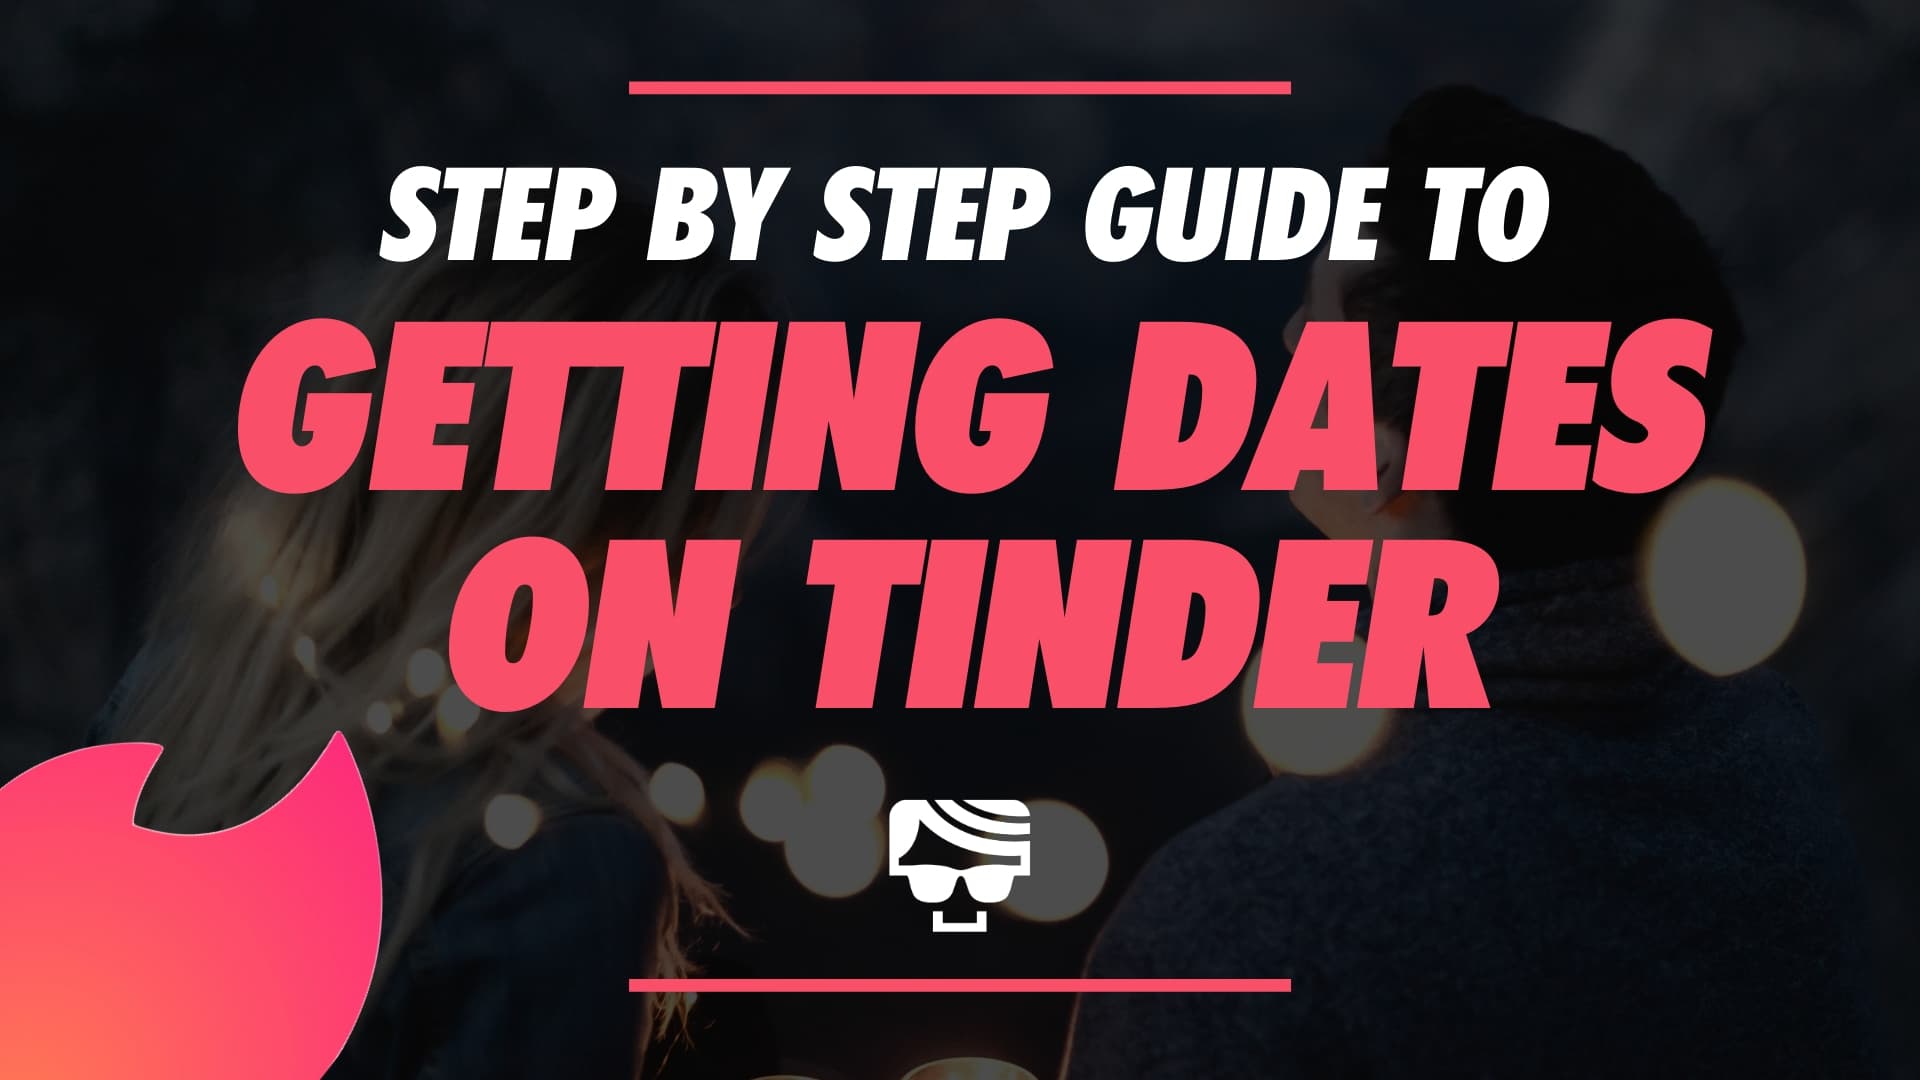 How To Get A Date On Tinder In 2023 – A Step-By-Step Guide To Getting Dates Quickly